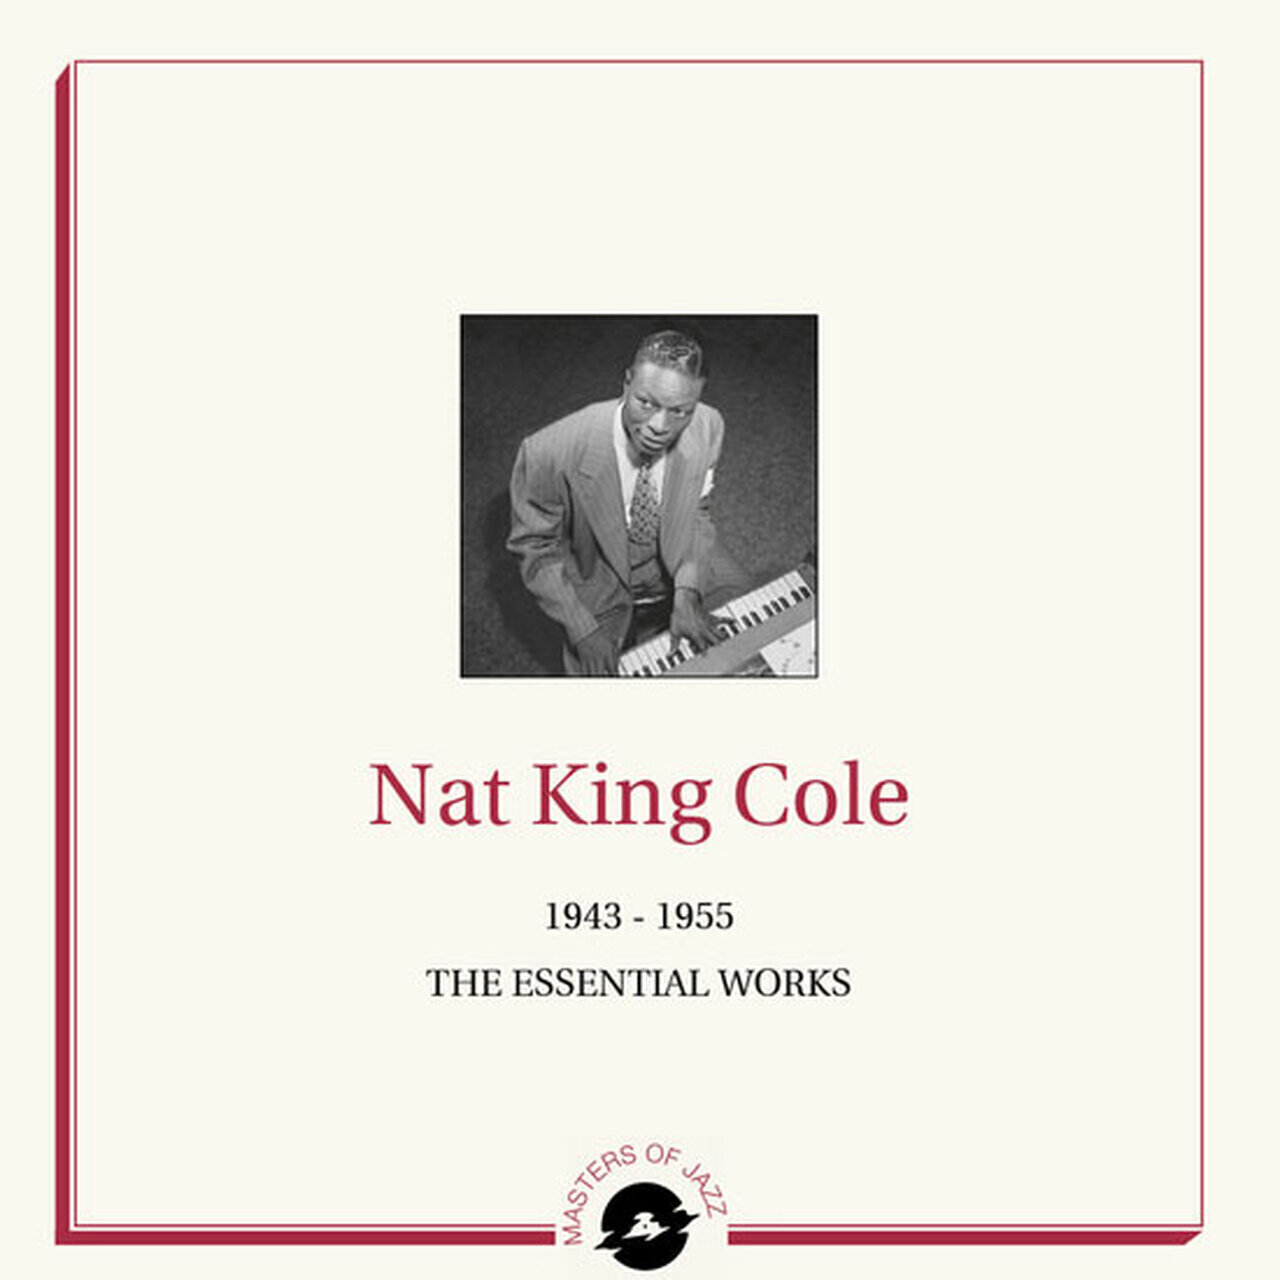 Vinyl Record Nat King Cole - 1943-1955 - The Essential Works (LP)